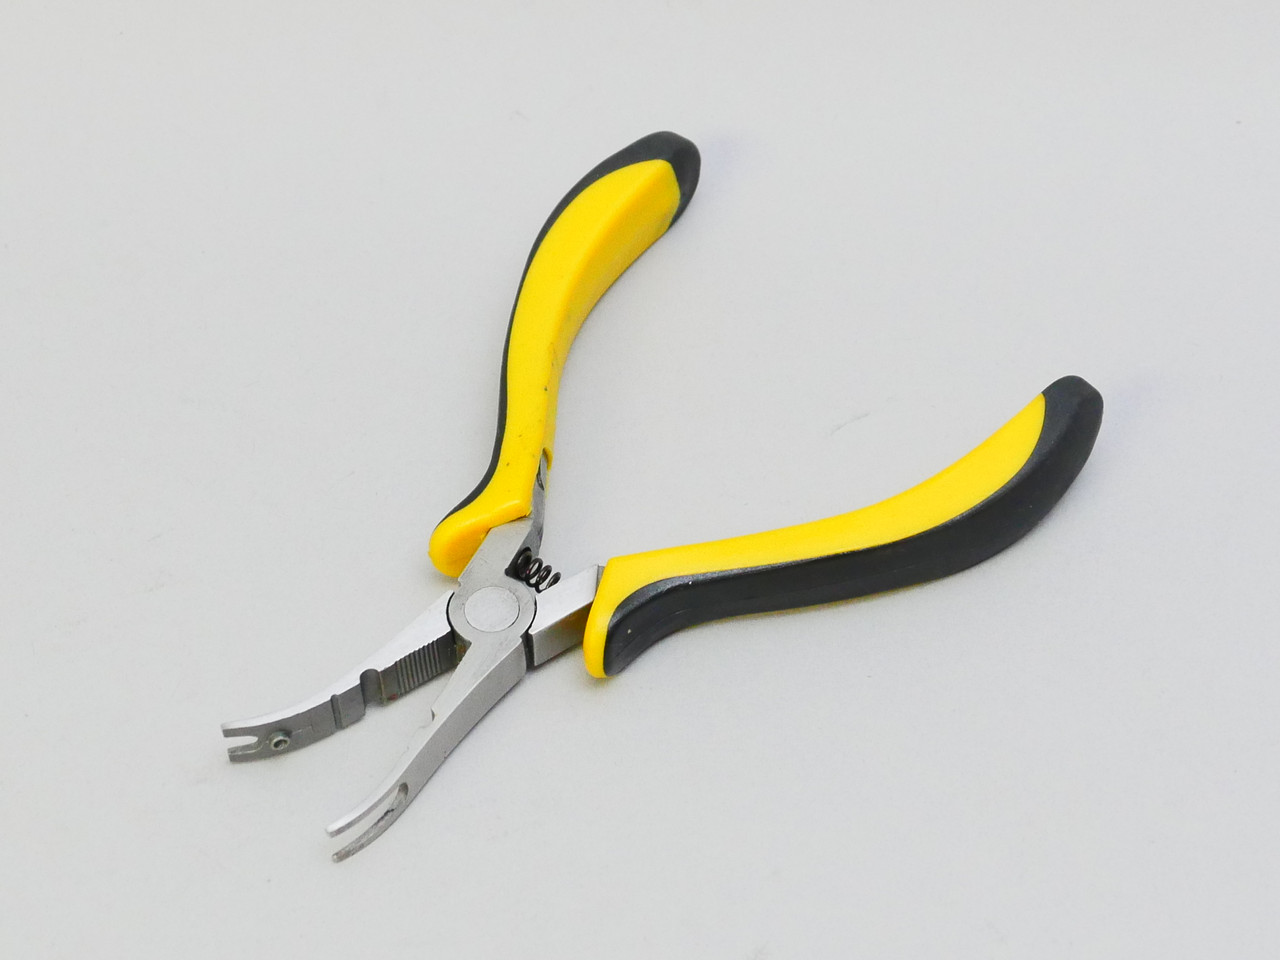 RC Model PLIERS TOOL Set Steel 3 PIECES Needle Nose -Cutter - Ball Link